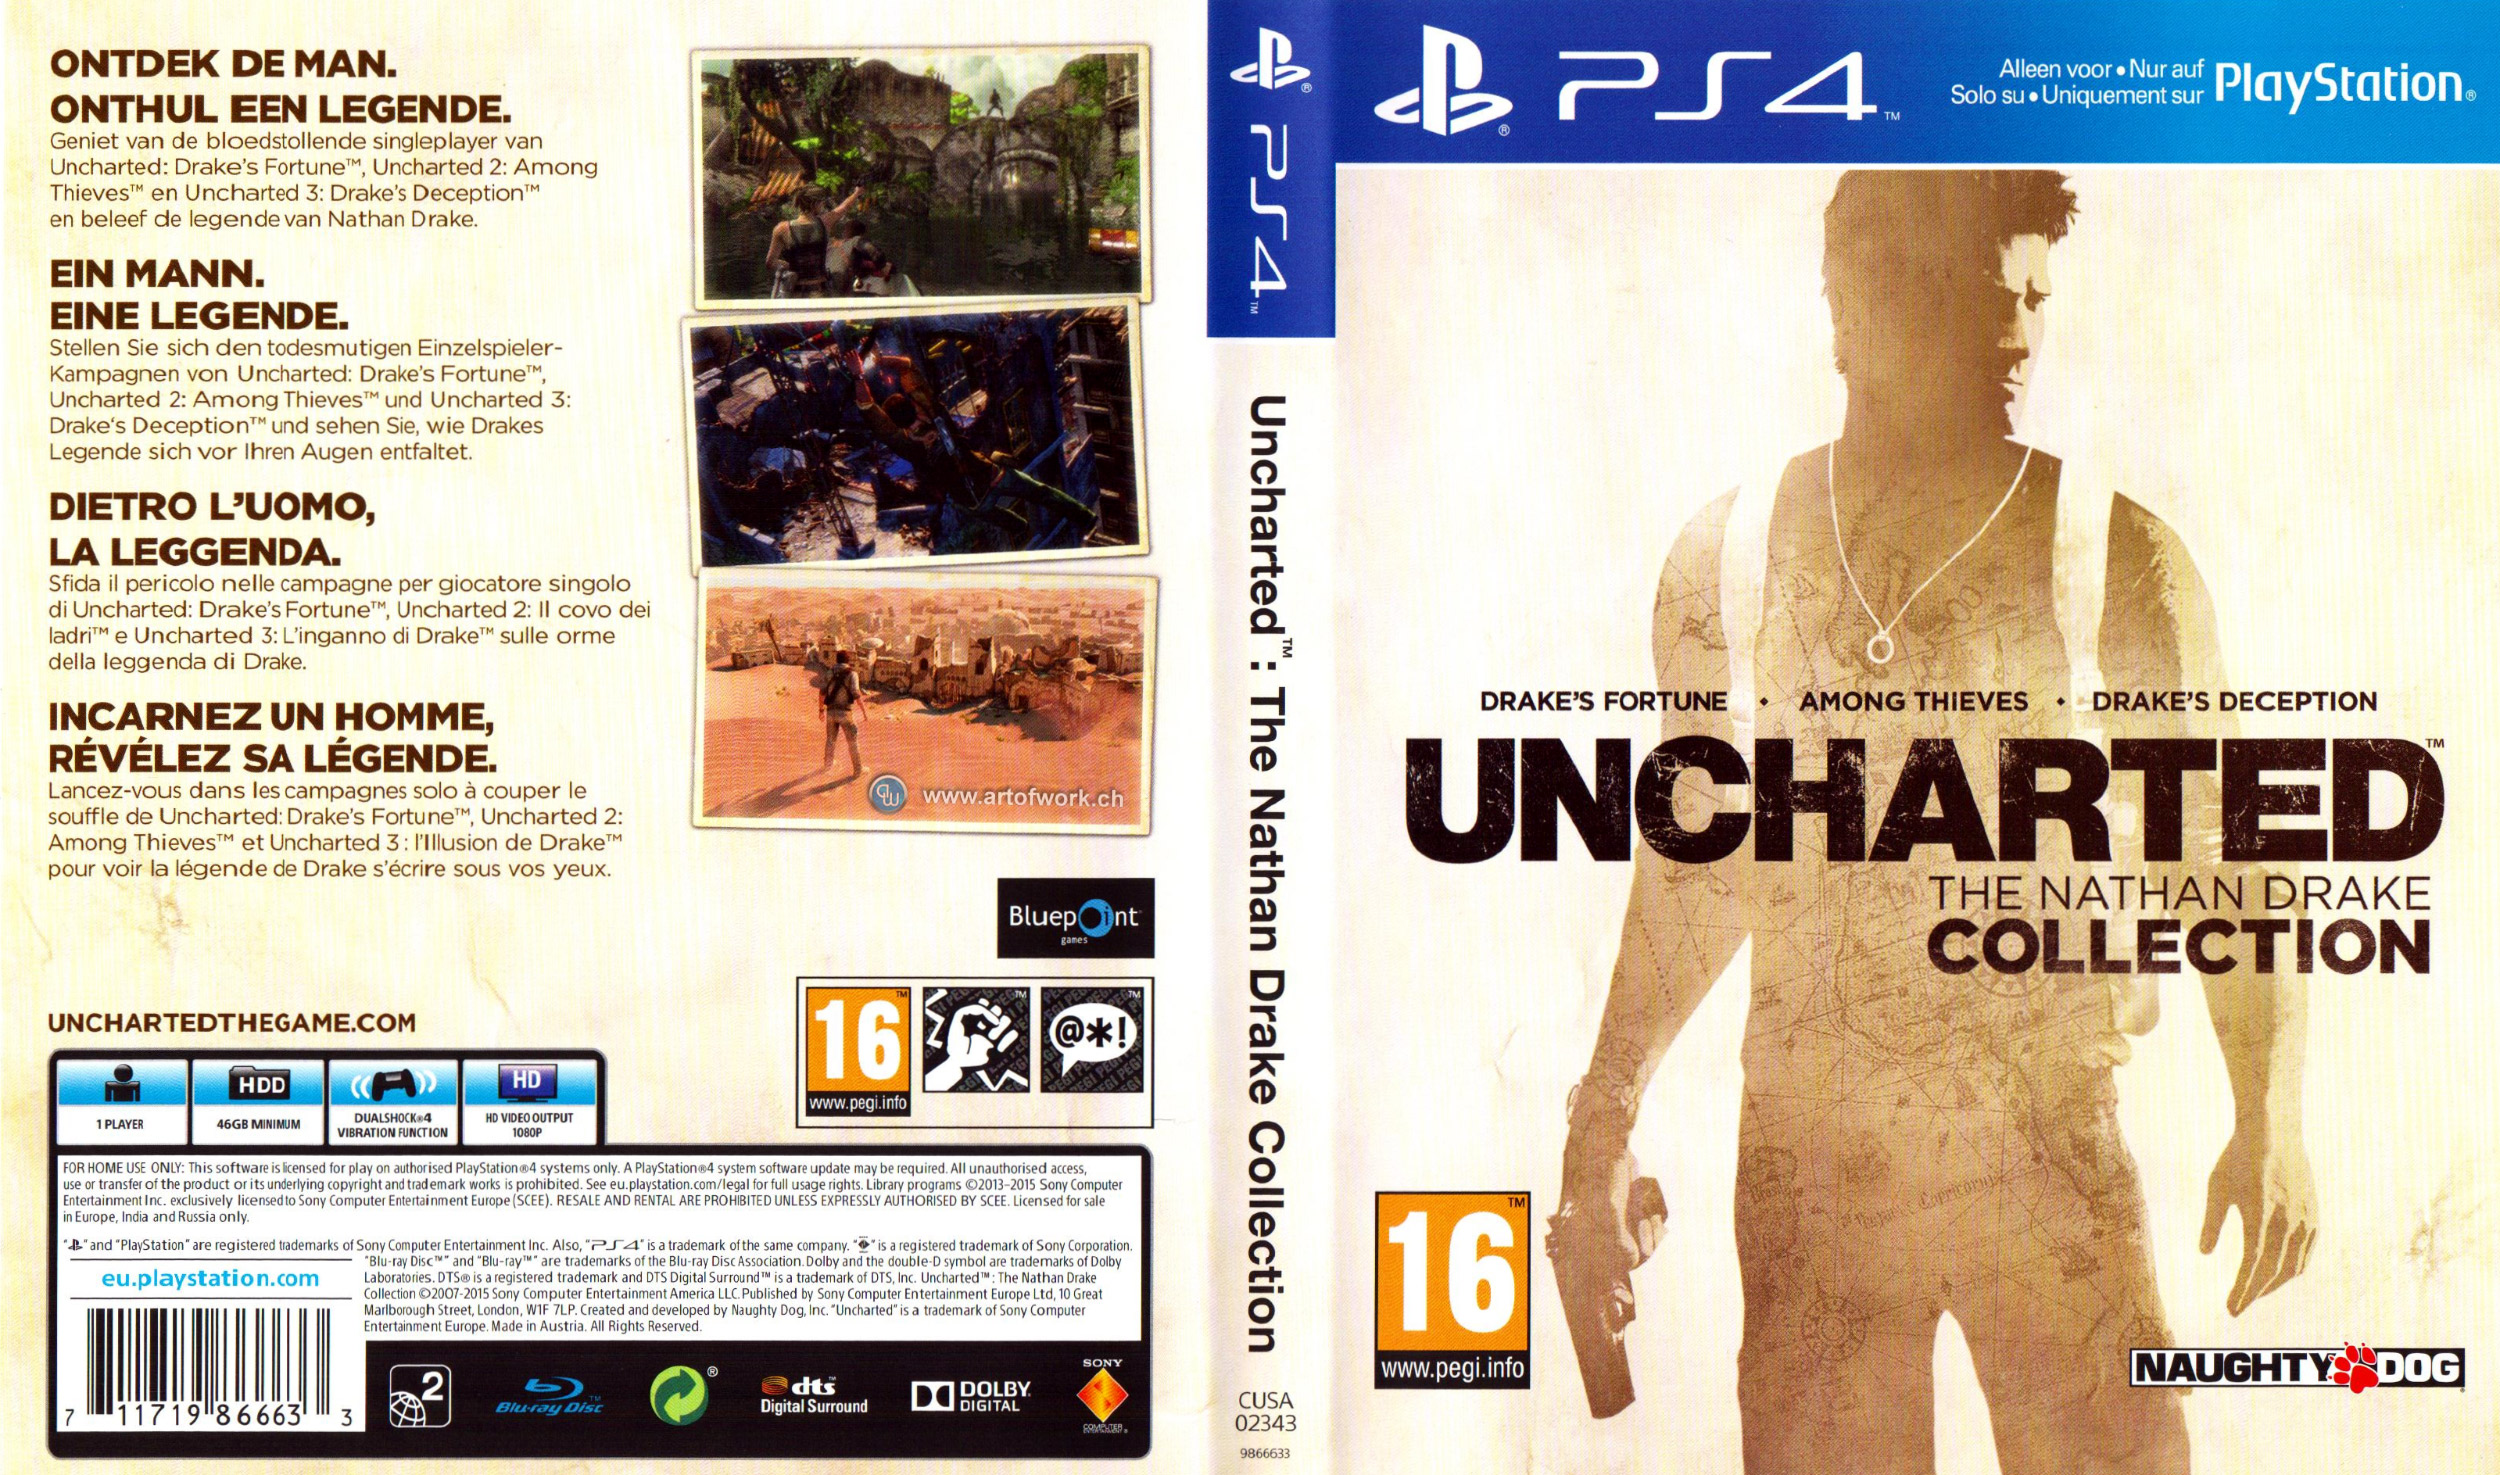 Uncharted The Nathan Drake Century Art Collection Covers 1.000.000 free Album for | | covers Playstation Cover 4 | Over